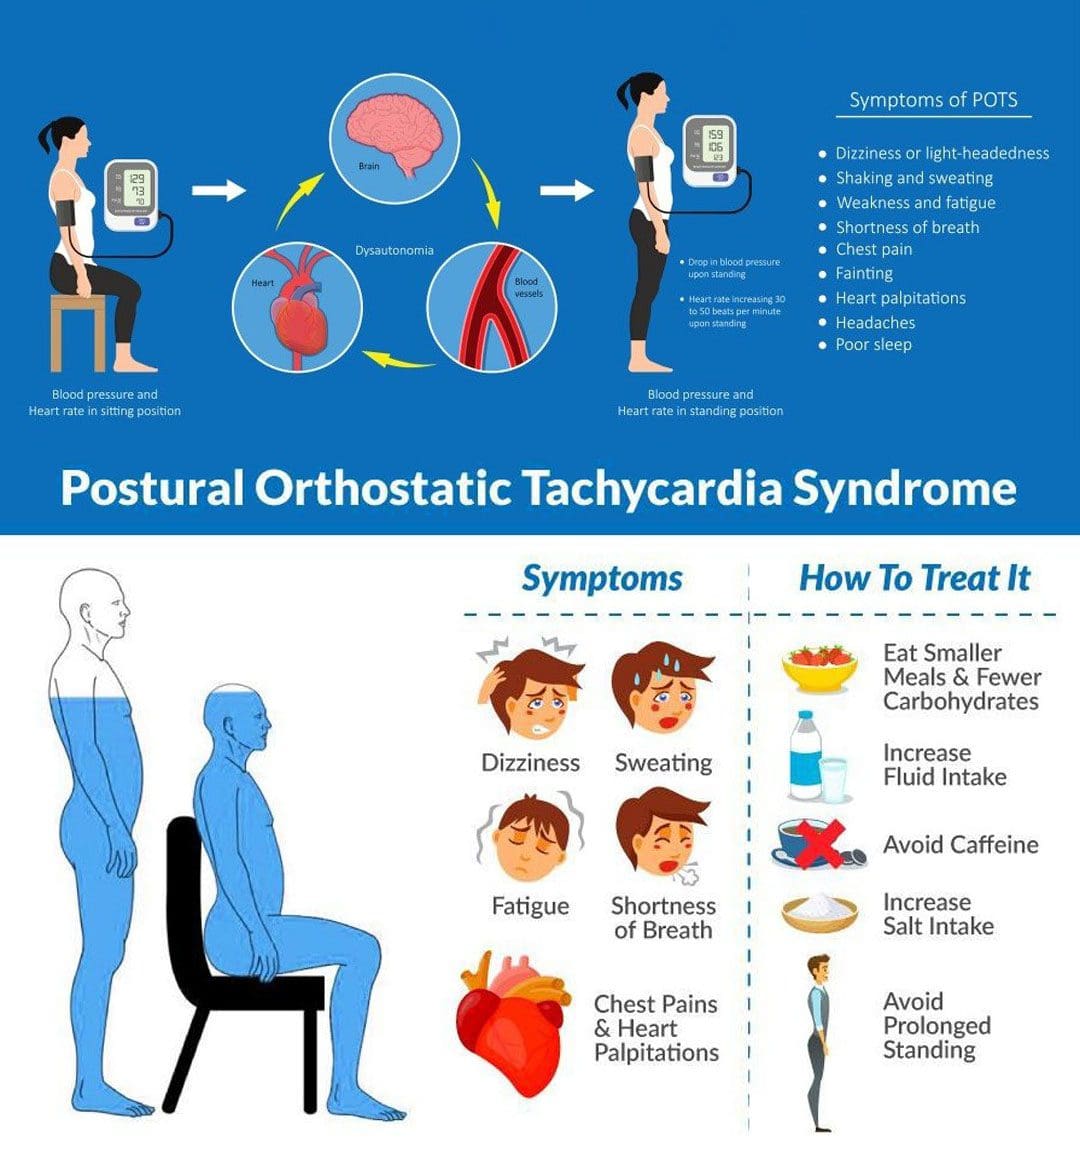 Tips For Managing Postural Orthostatic Tachycardia Syndrome